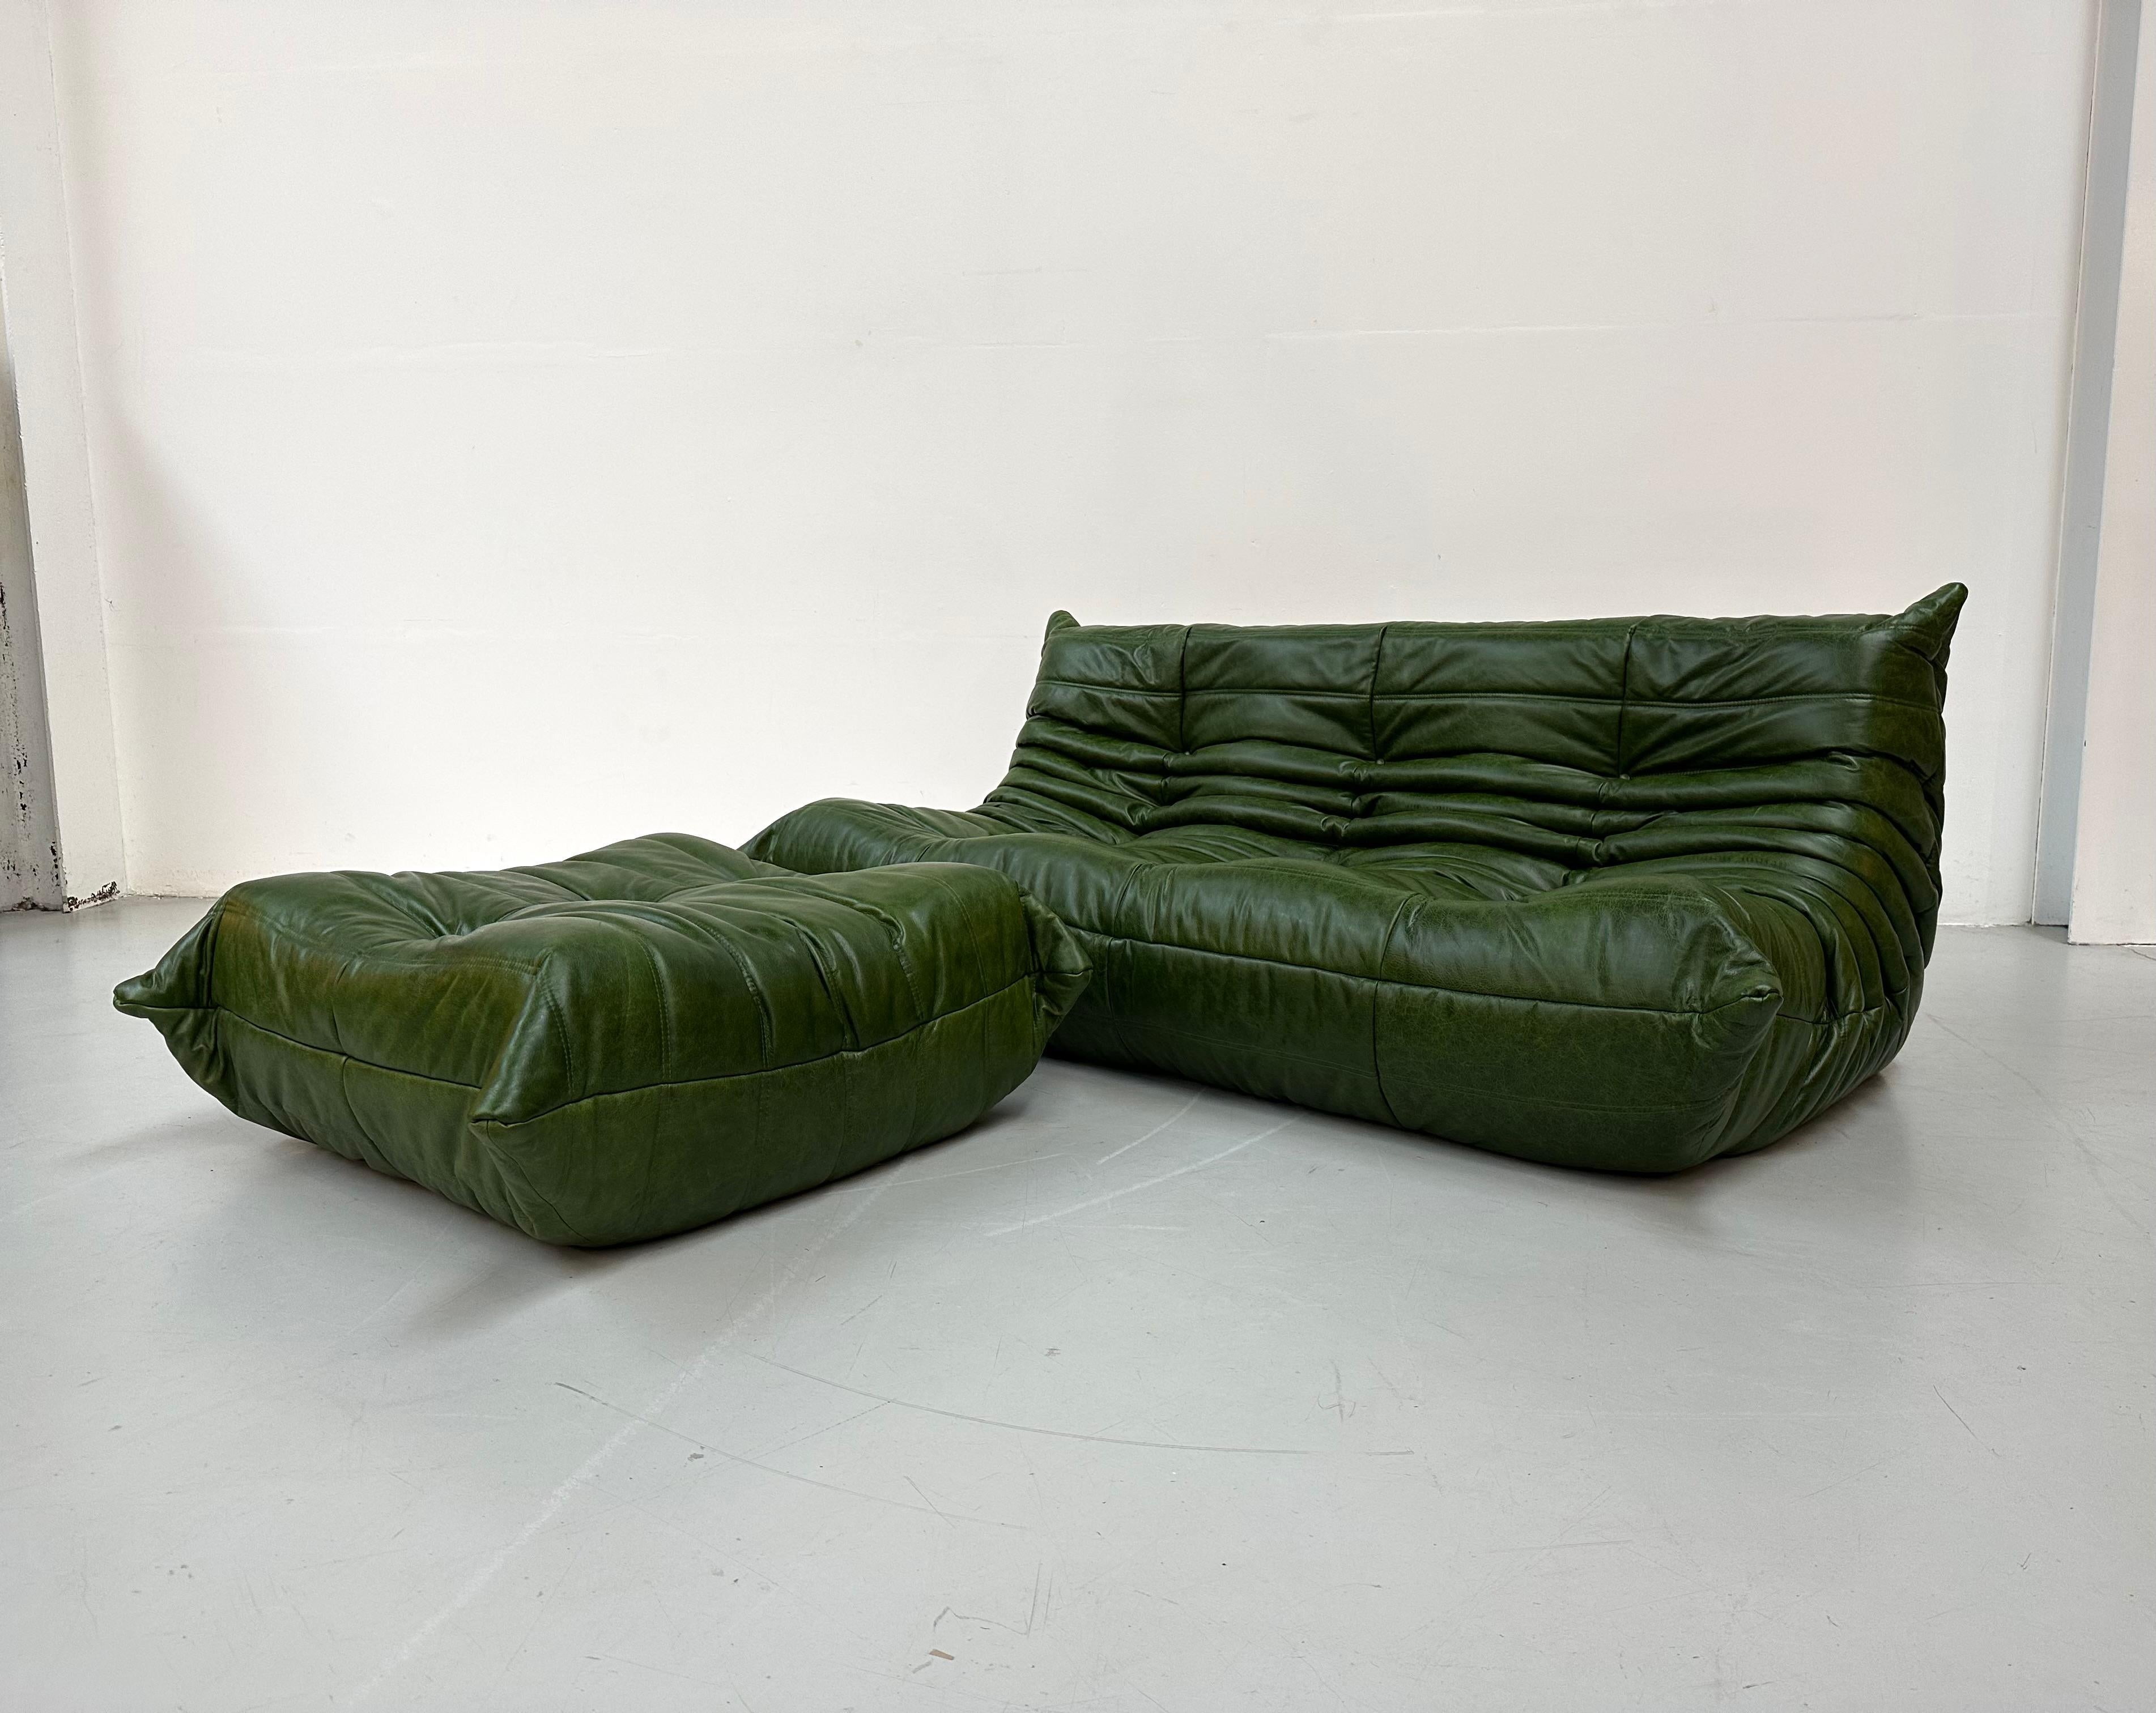 20th Century French Togo Sofa with Ottoman in Green Leather by M.Ducaroy for Ligne Roset.